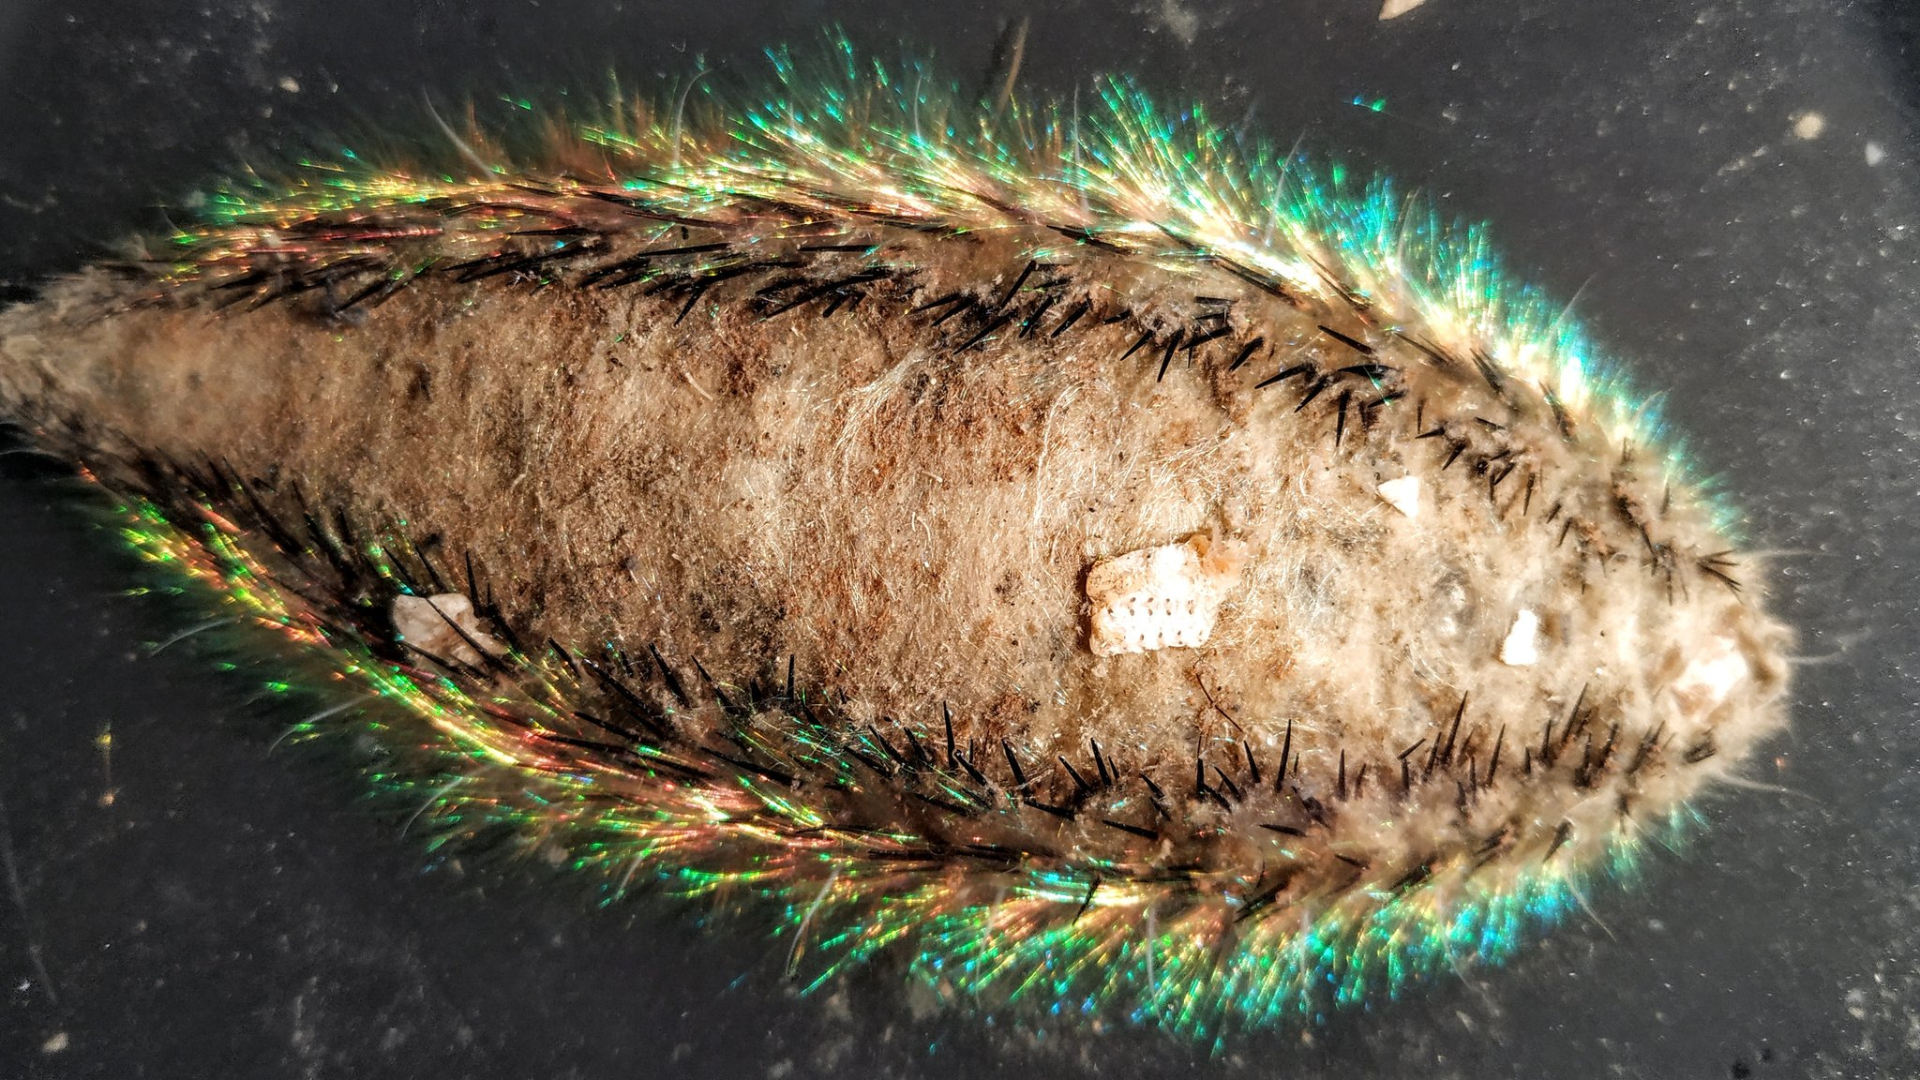  This cute creature is the Sea mouse Aphrodita acuelata, a pickle sized predatory polychaete worm with beautiful setae (hairs) with photonic crystals. Foto: Lodewijk van Walraven